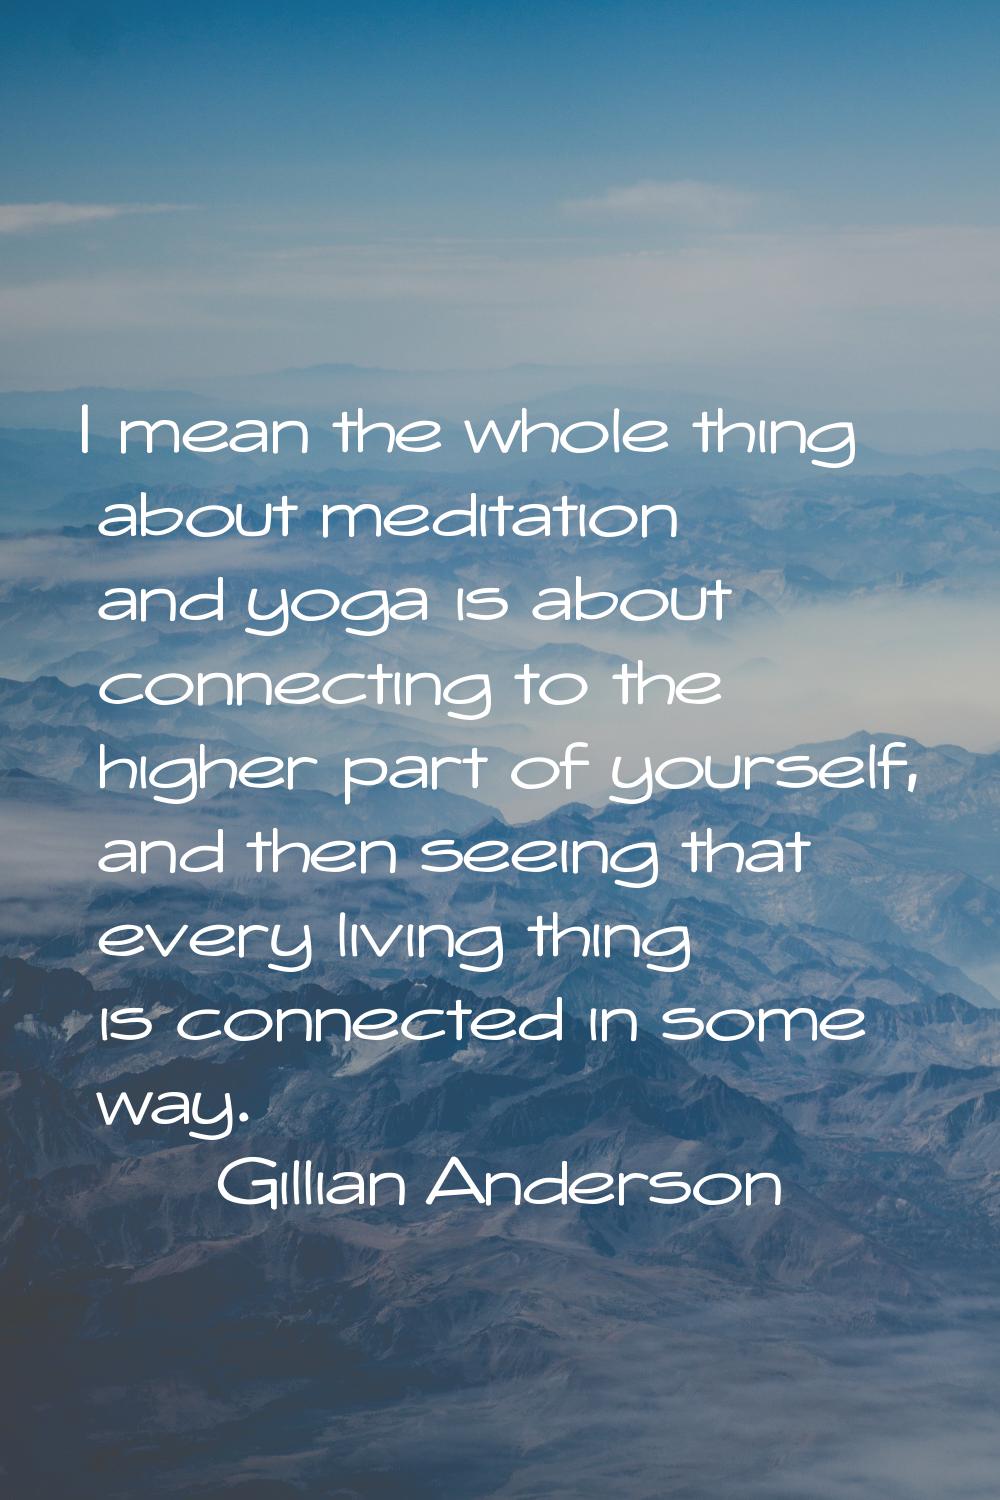 I mean the whole thing about meditation and yoga is about connecting to the higher part of yourself